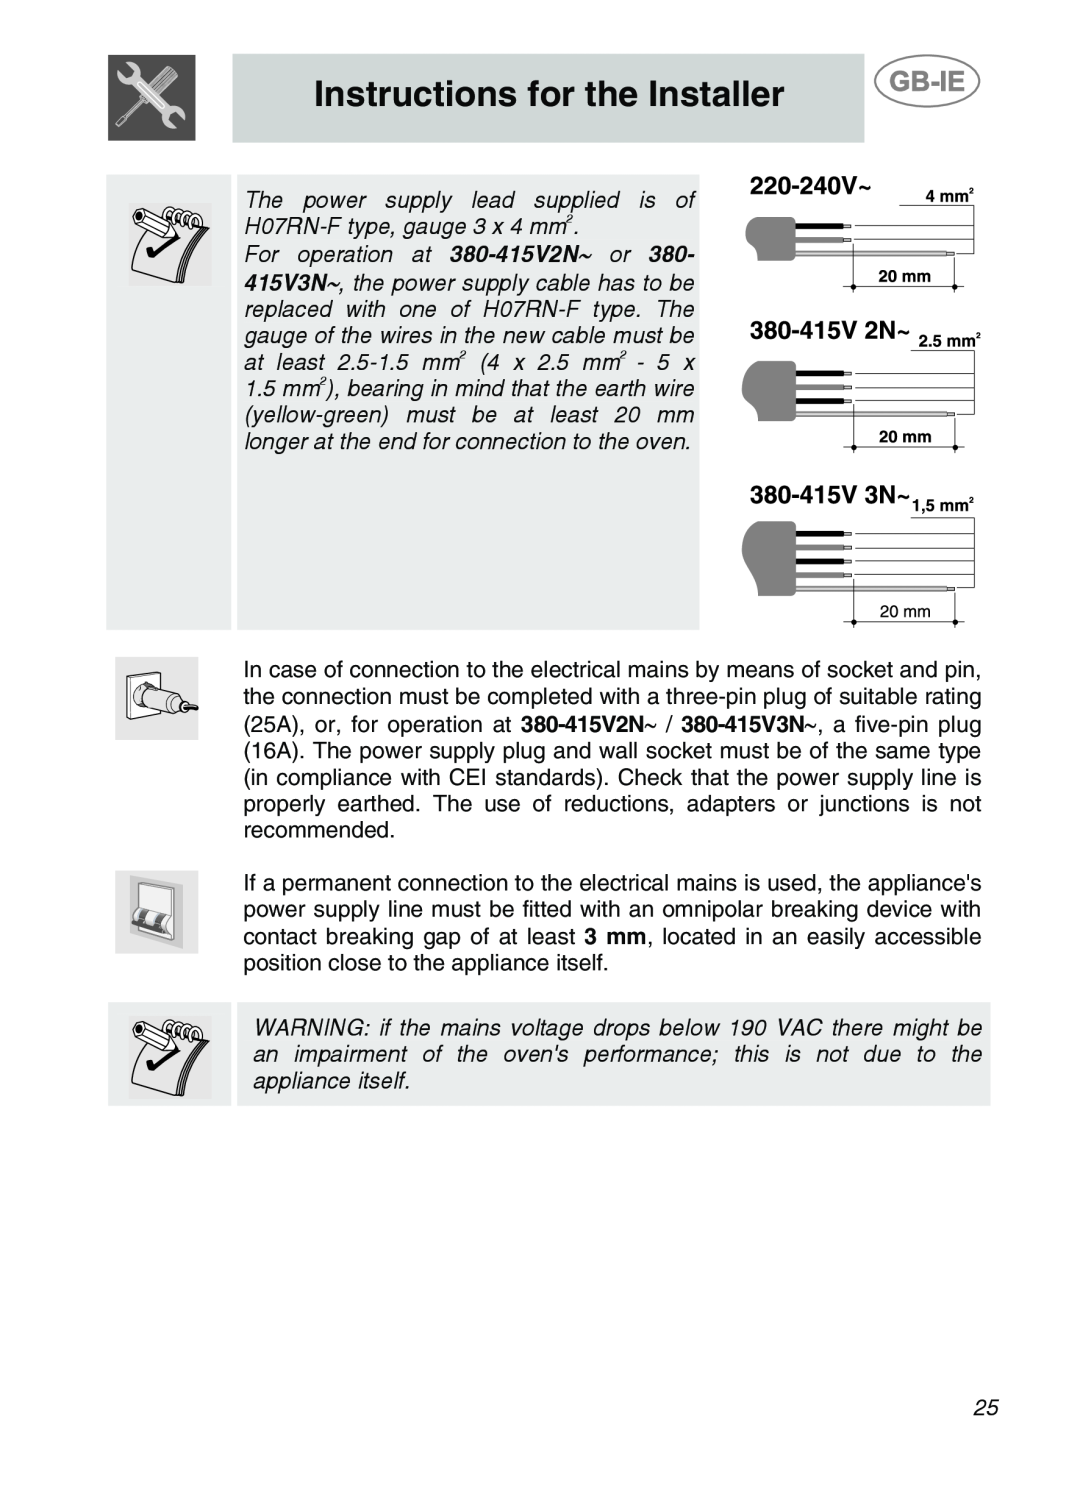 Smeg ALFA135V6 manual Instructions for the Installer, The power supply lead supplied is of H07RN-Ftype, gauge 3 x 4 mm2 